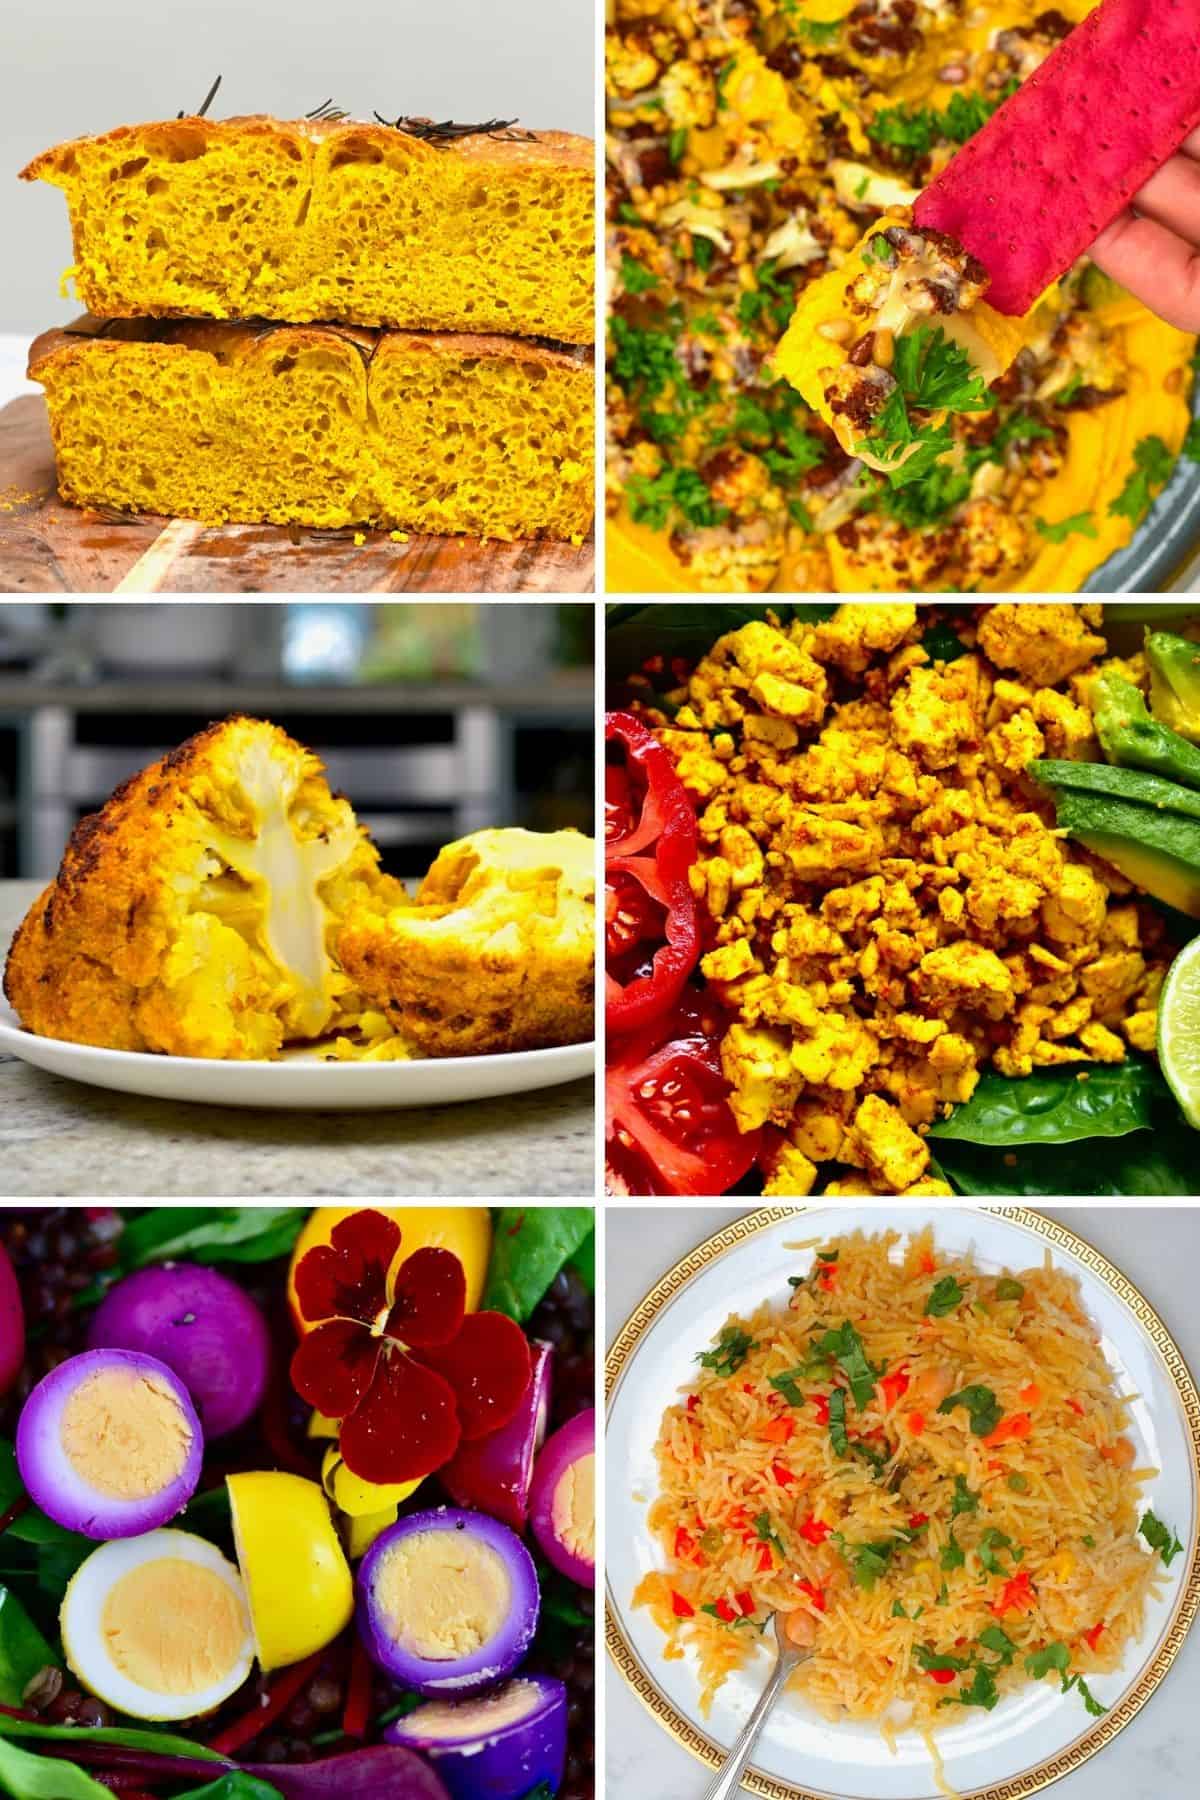 Appetizers and side dishes with turmeric